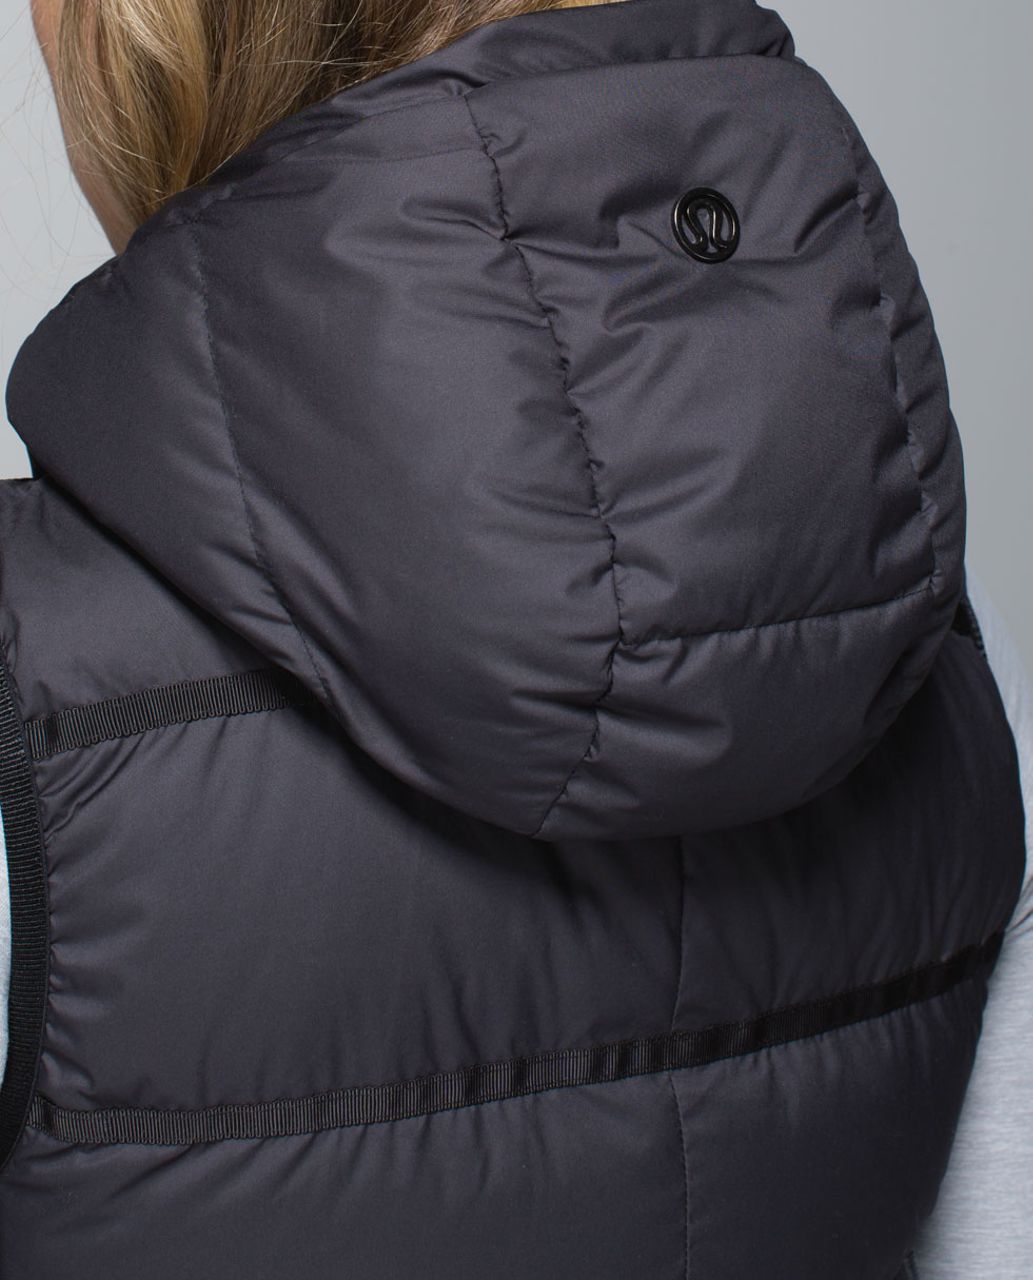 Lululemon Chilly Chill Puffy Vest - Black / Gin Gin Gingham Embossed Black Mojave Tan